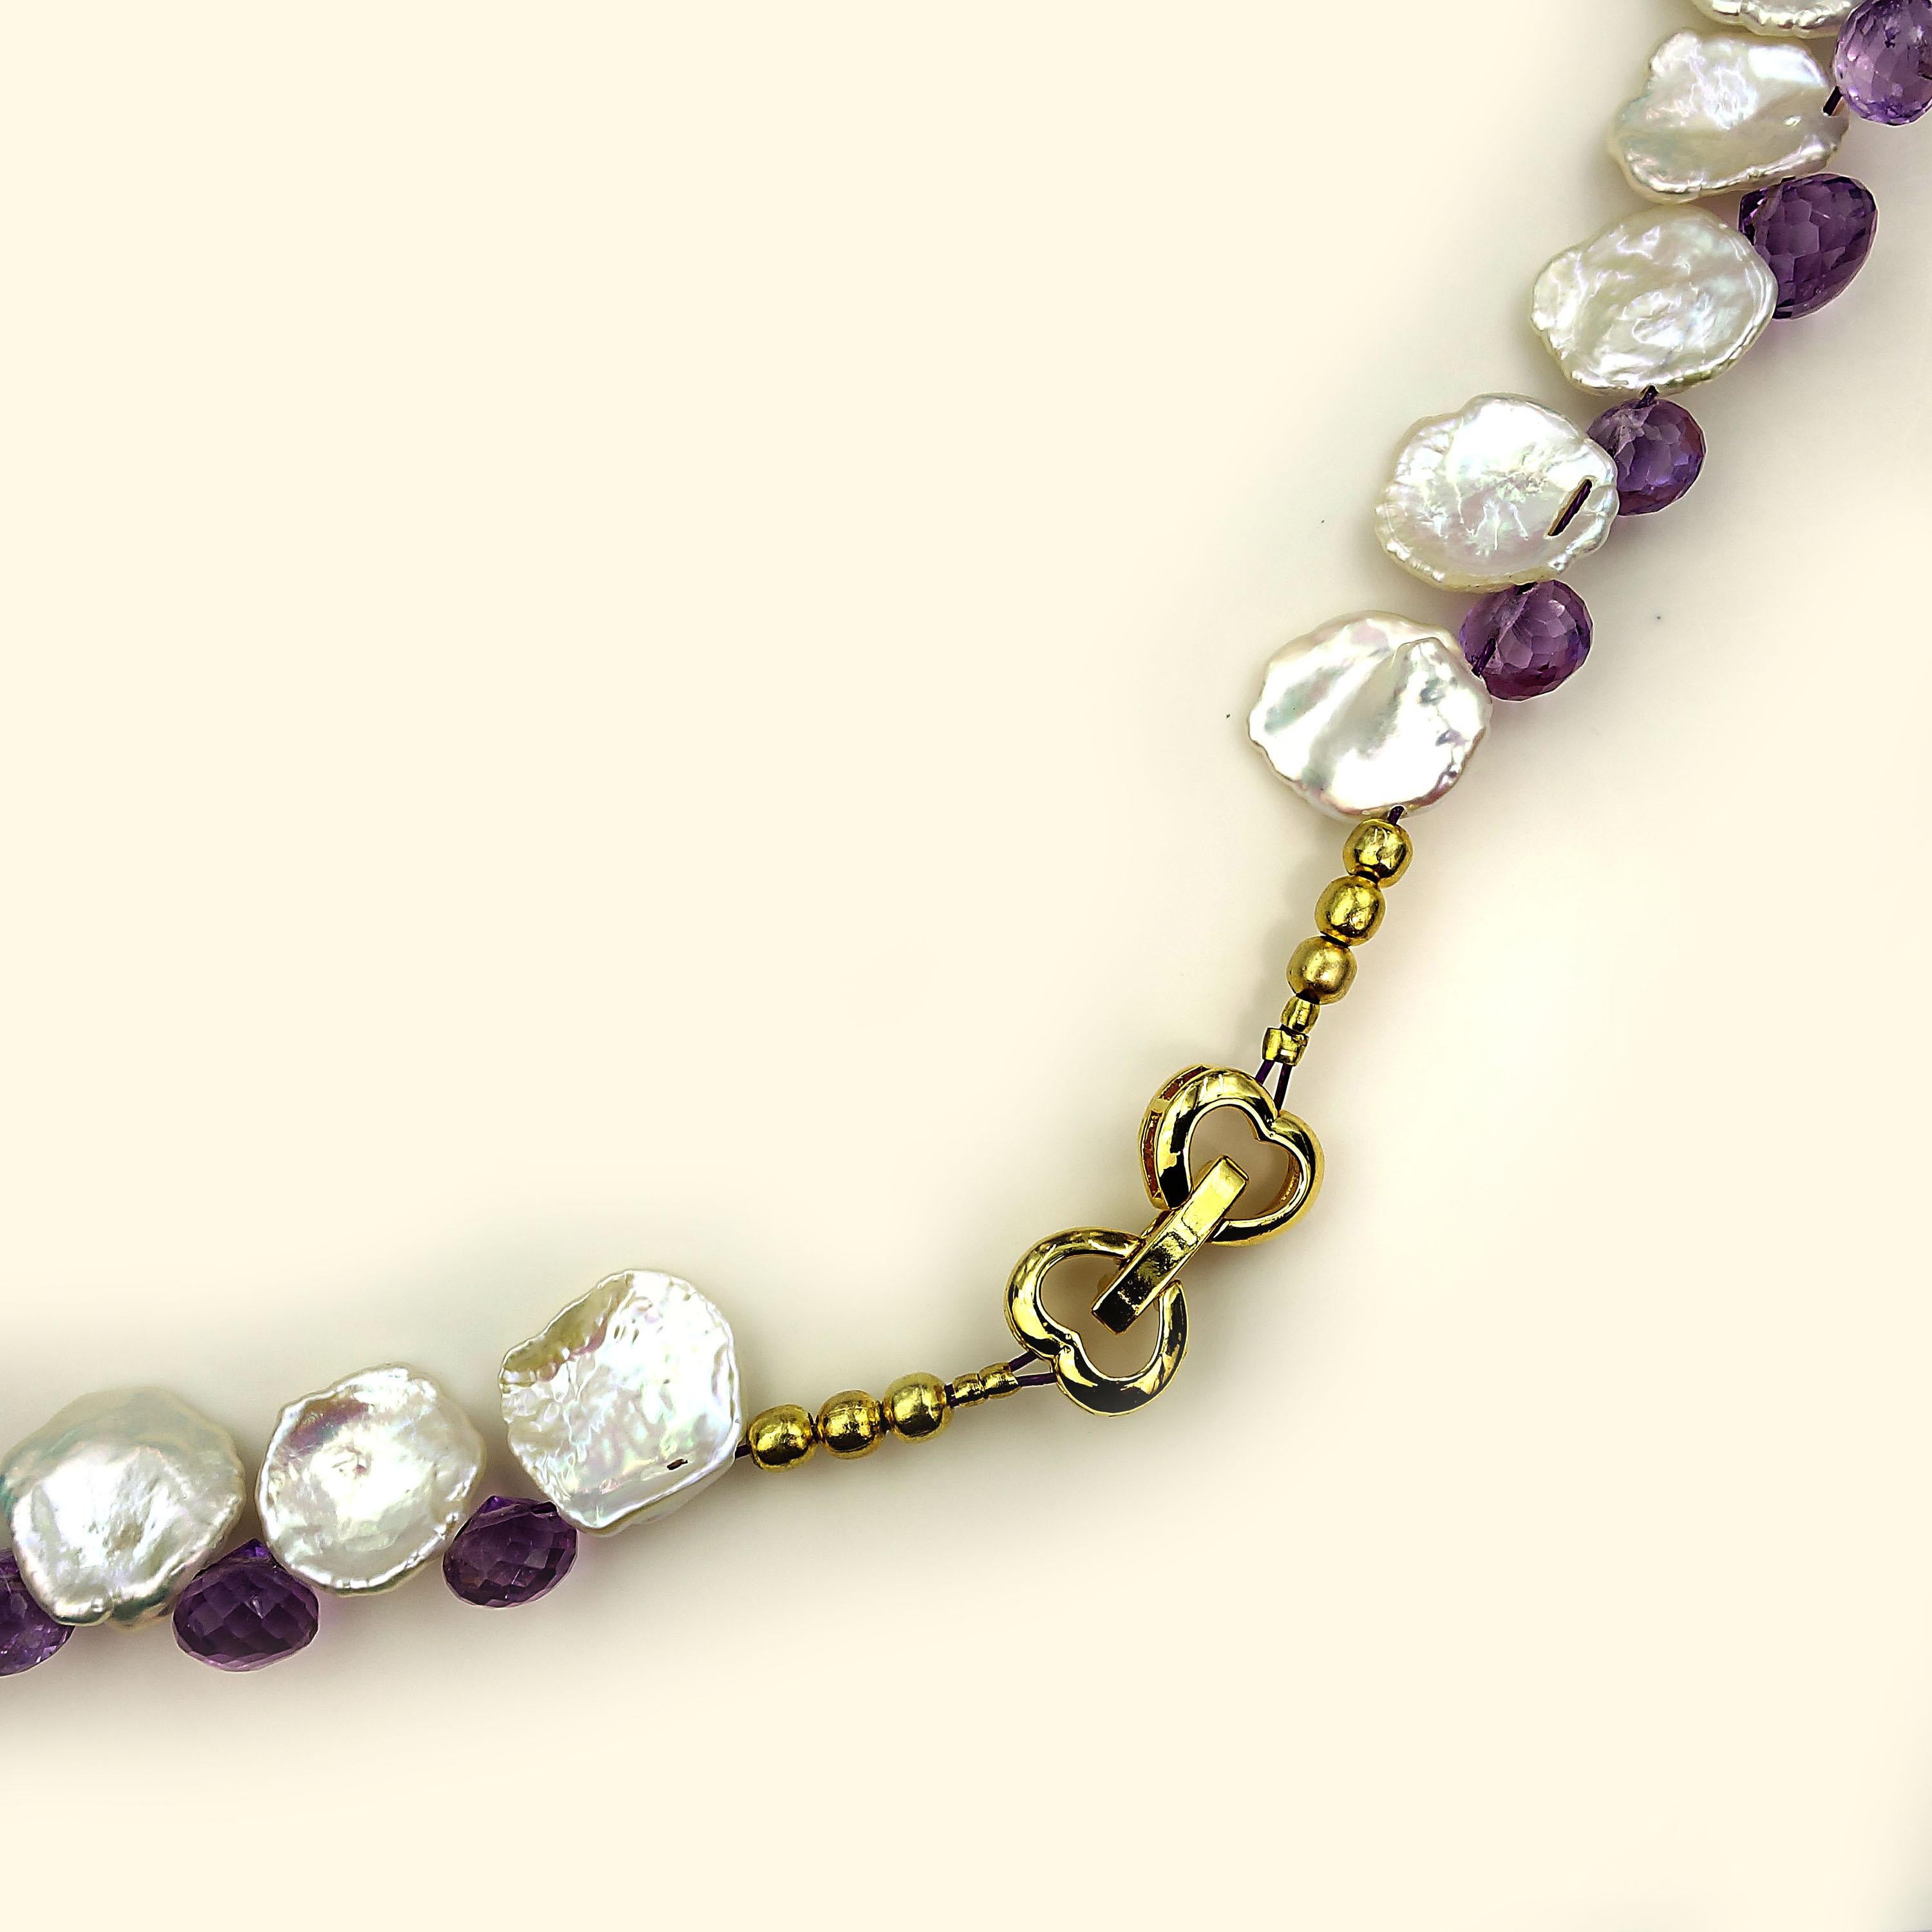 Women's Gemjunky Iridescent White Keshi Pearl and Amethyst Briolette Necklace 